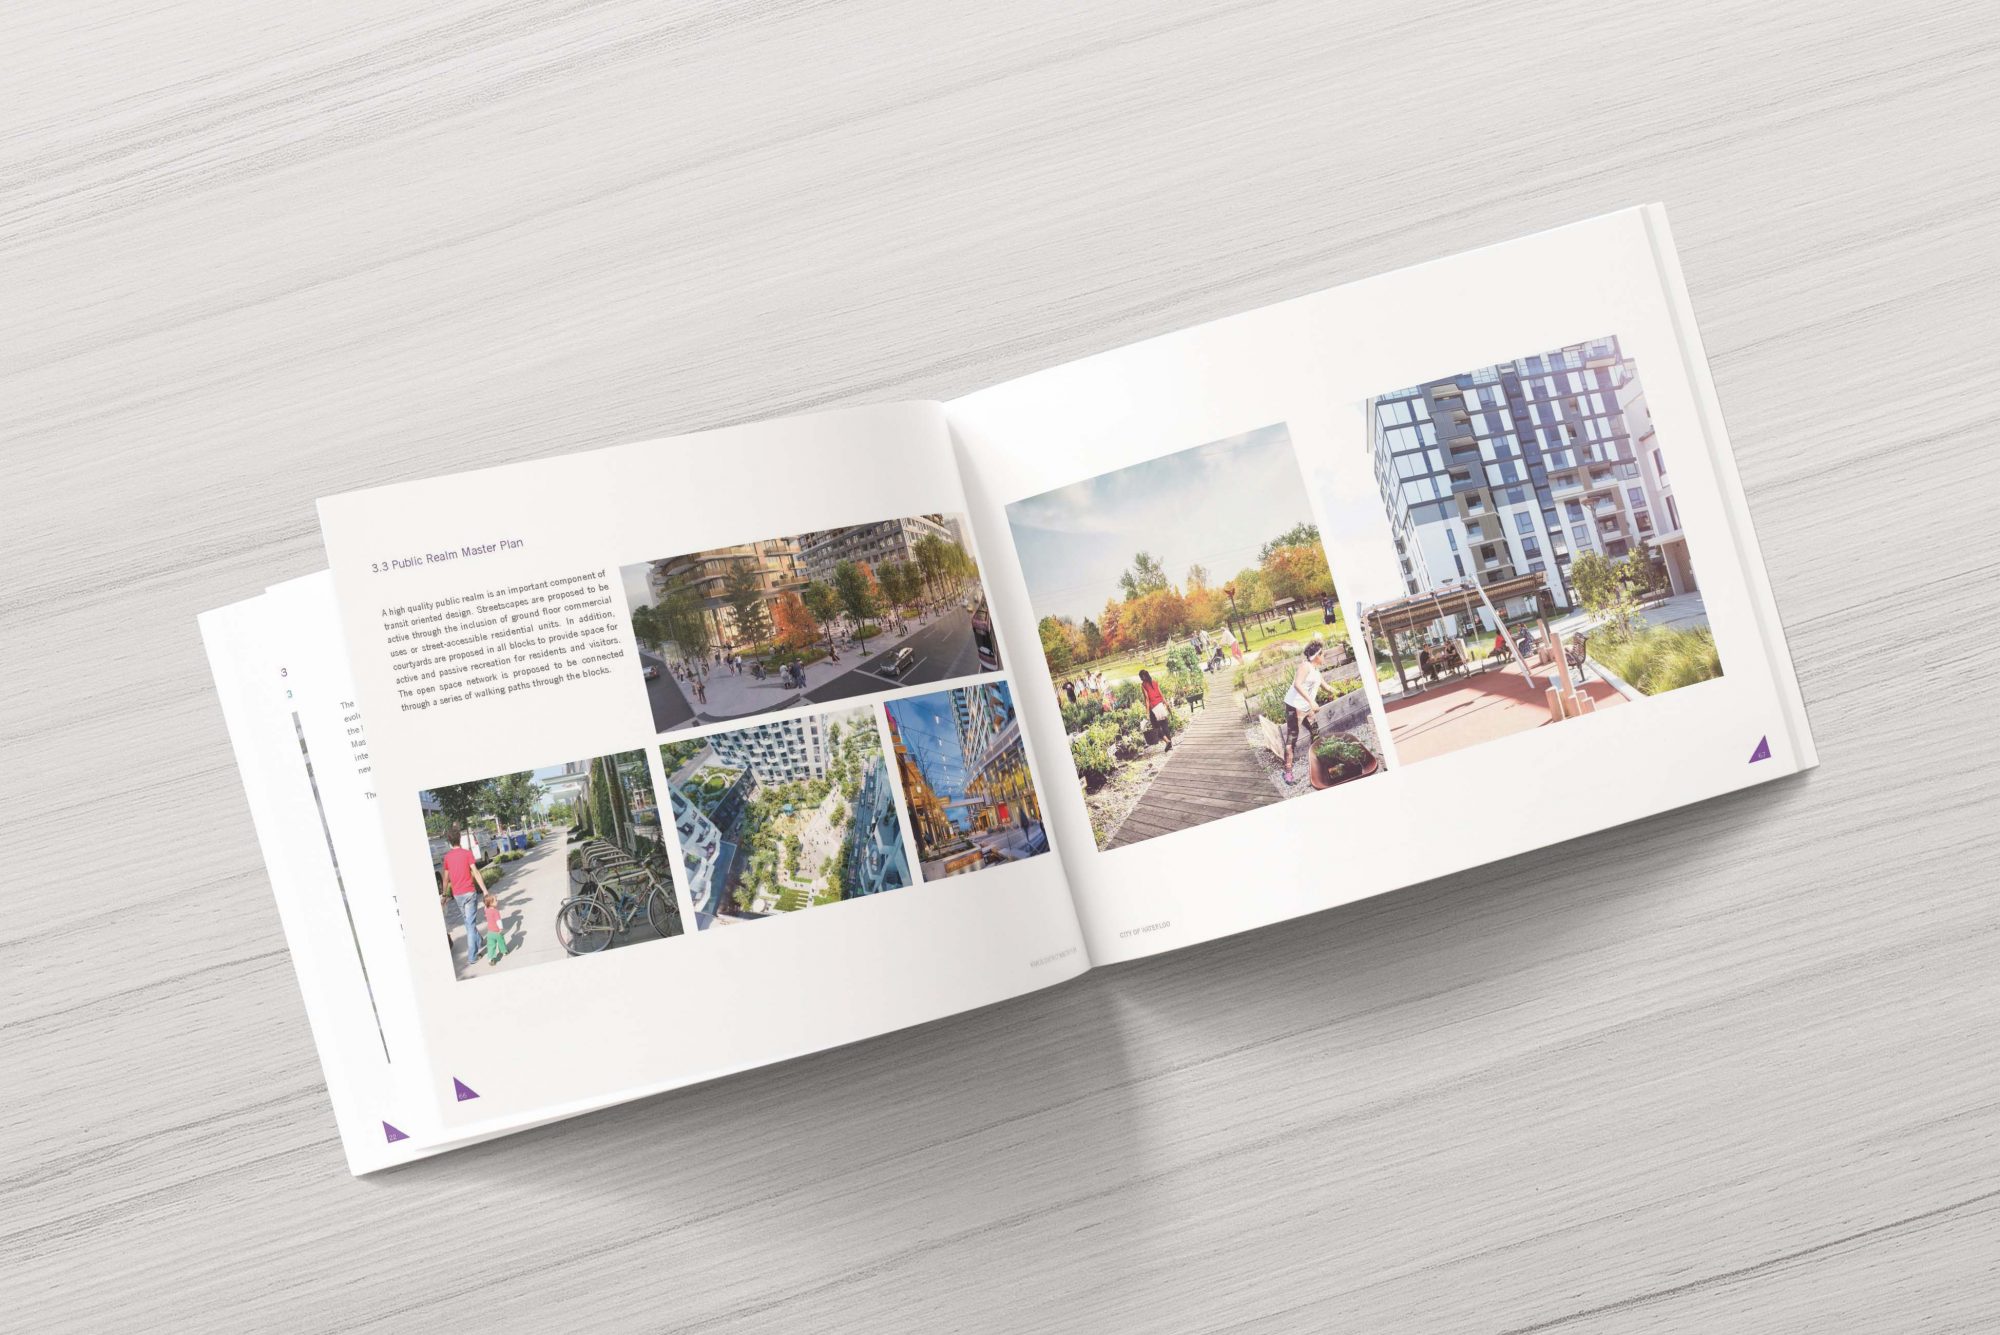 A report sits open and the pages illustrate various outdoor public realm precedents.